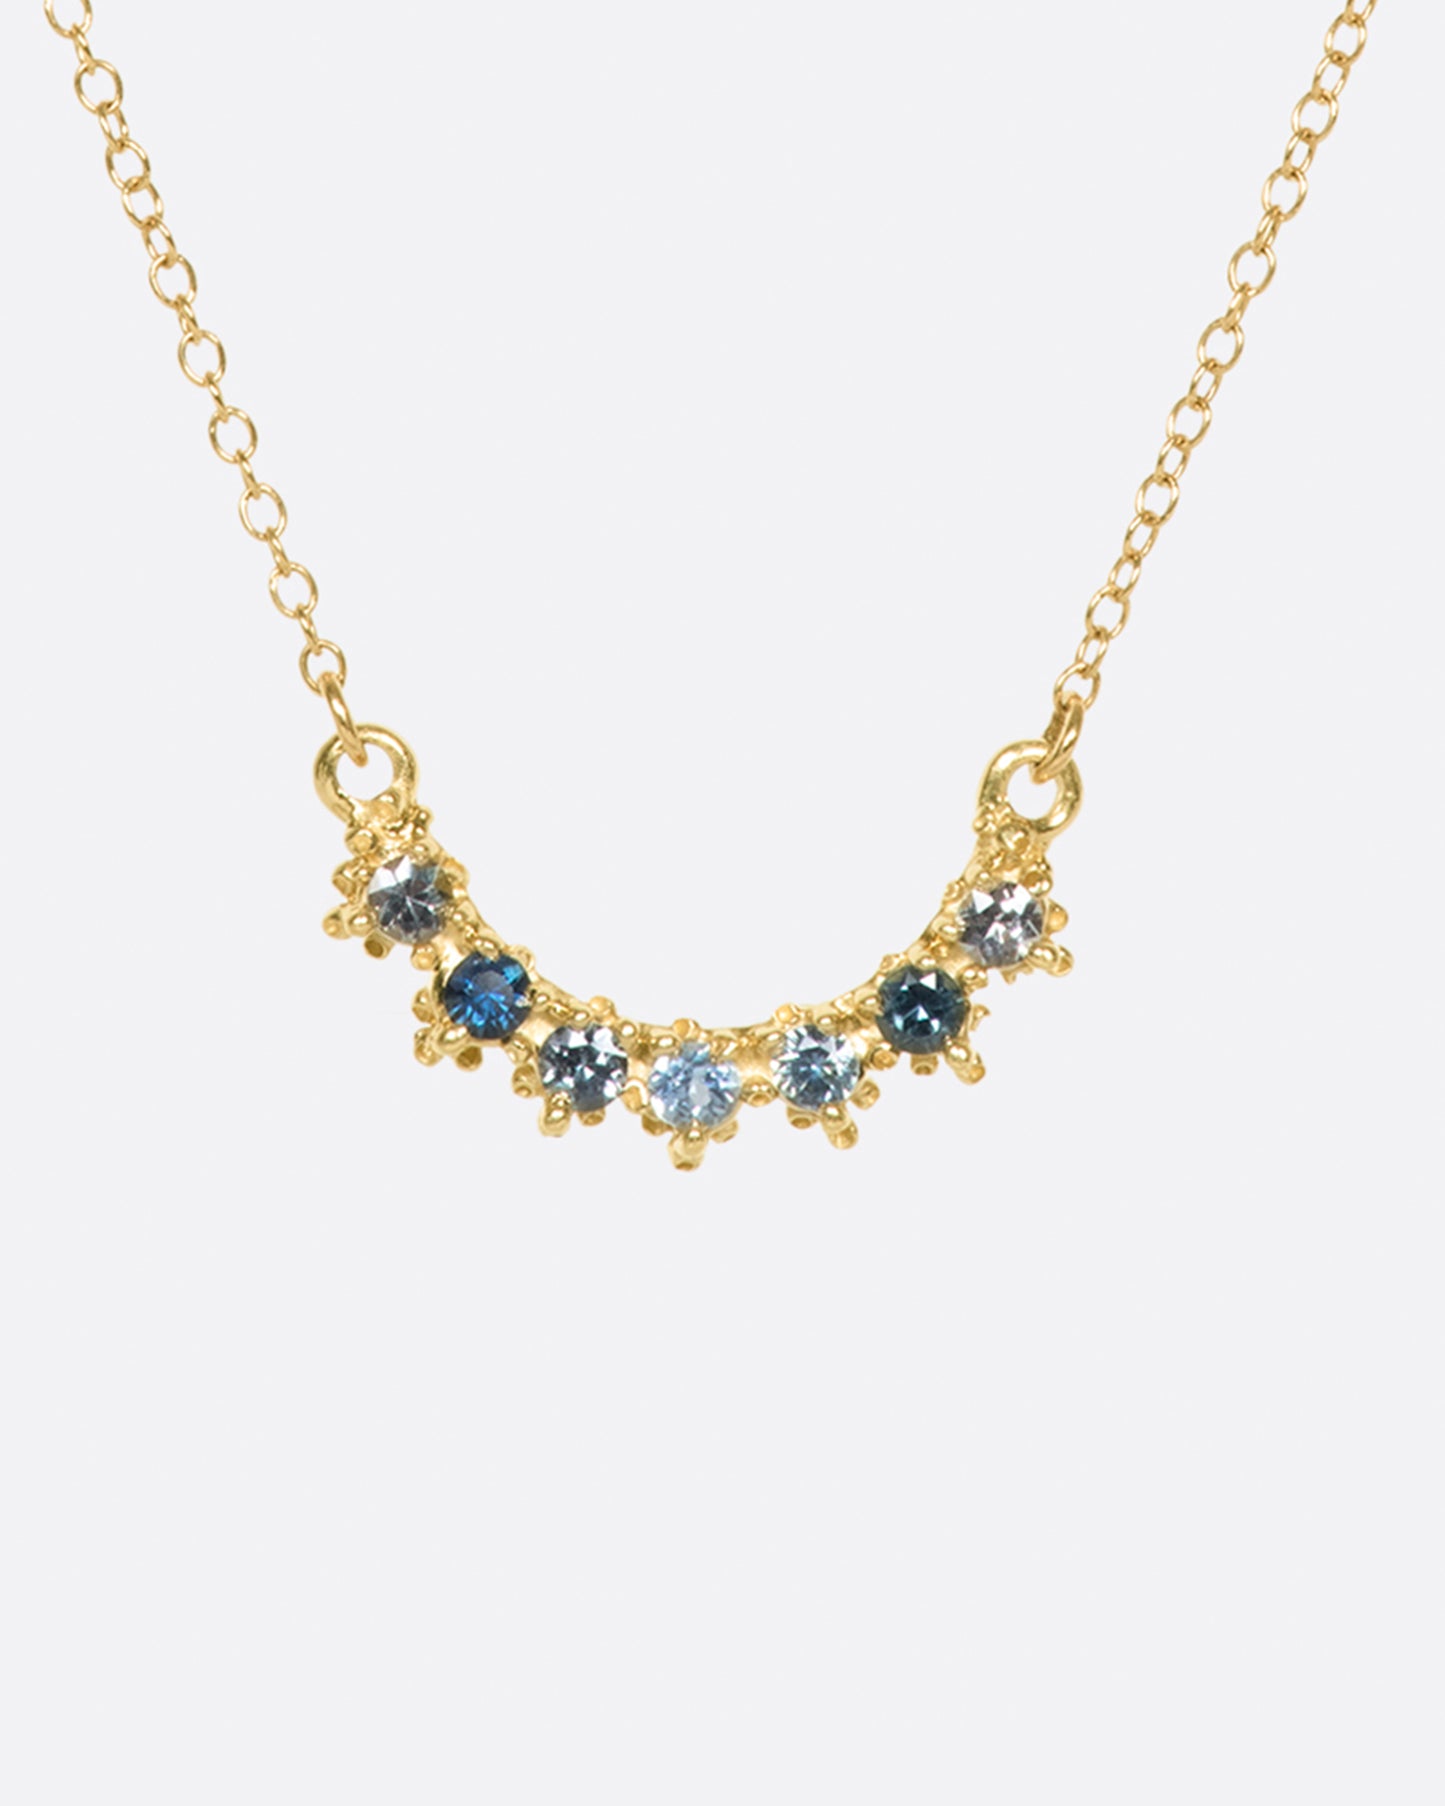 A curved bar necklace set with seven sapphires in varying shades of blue.